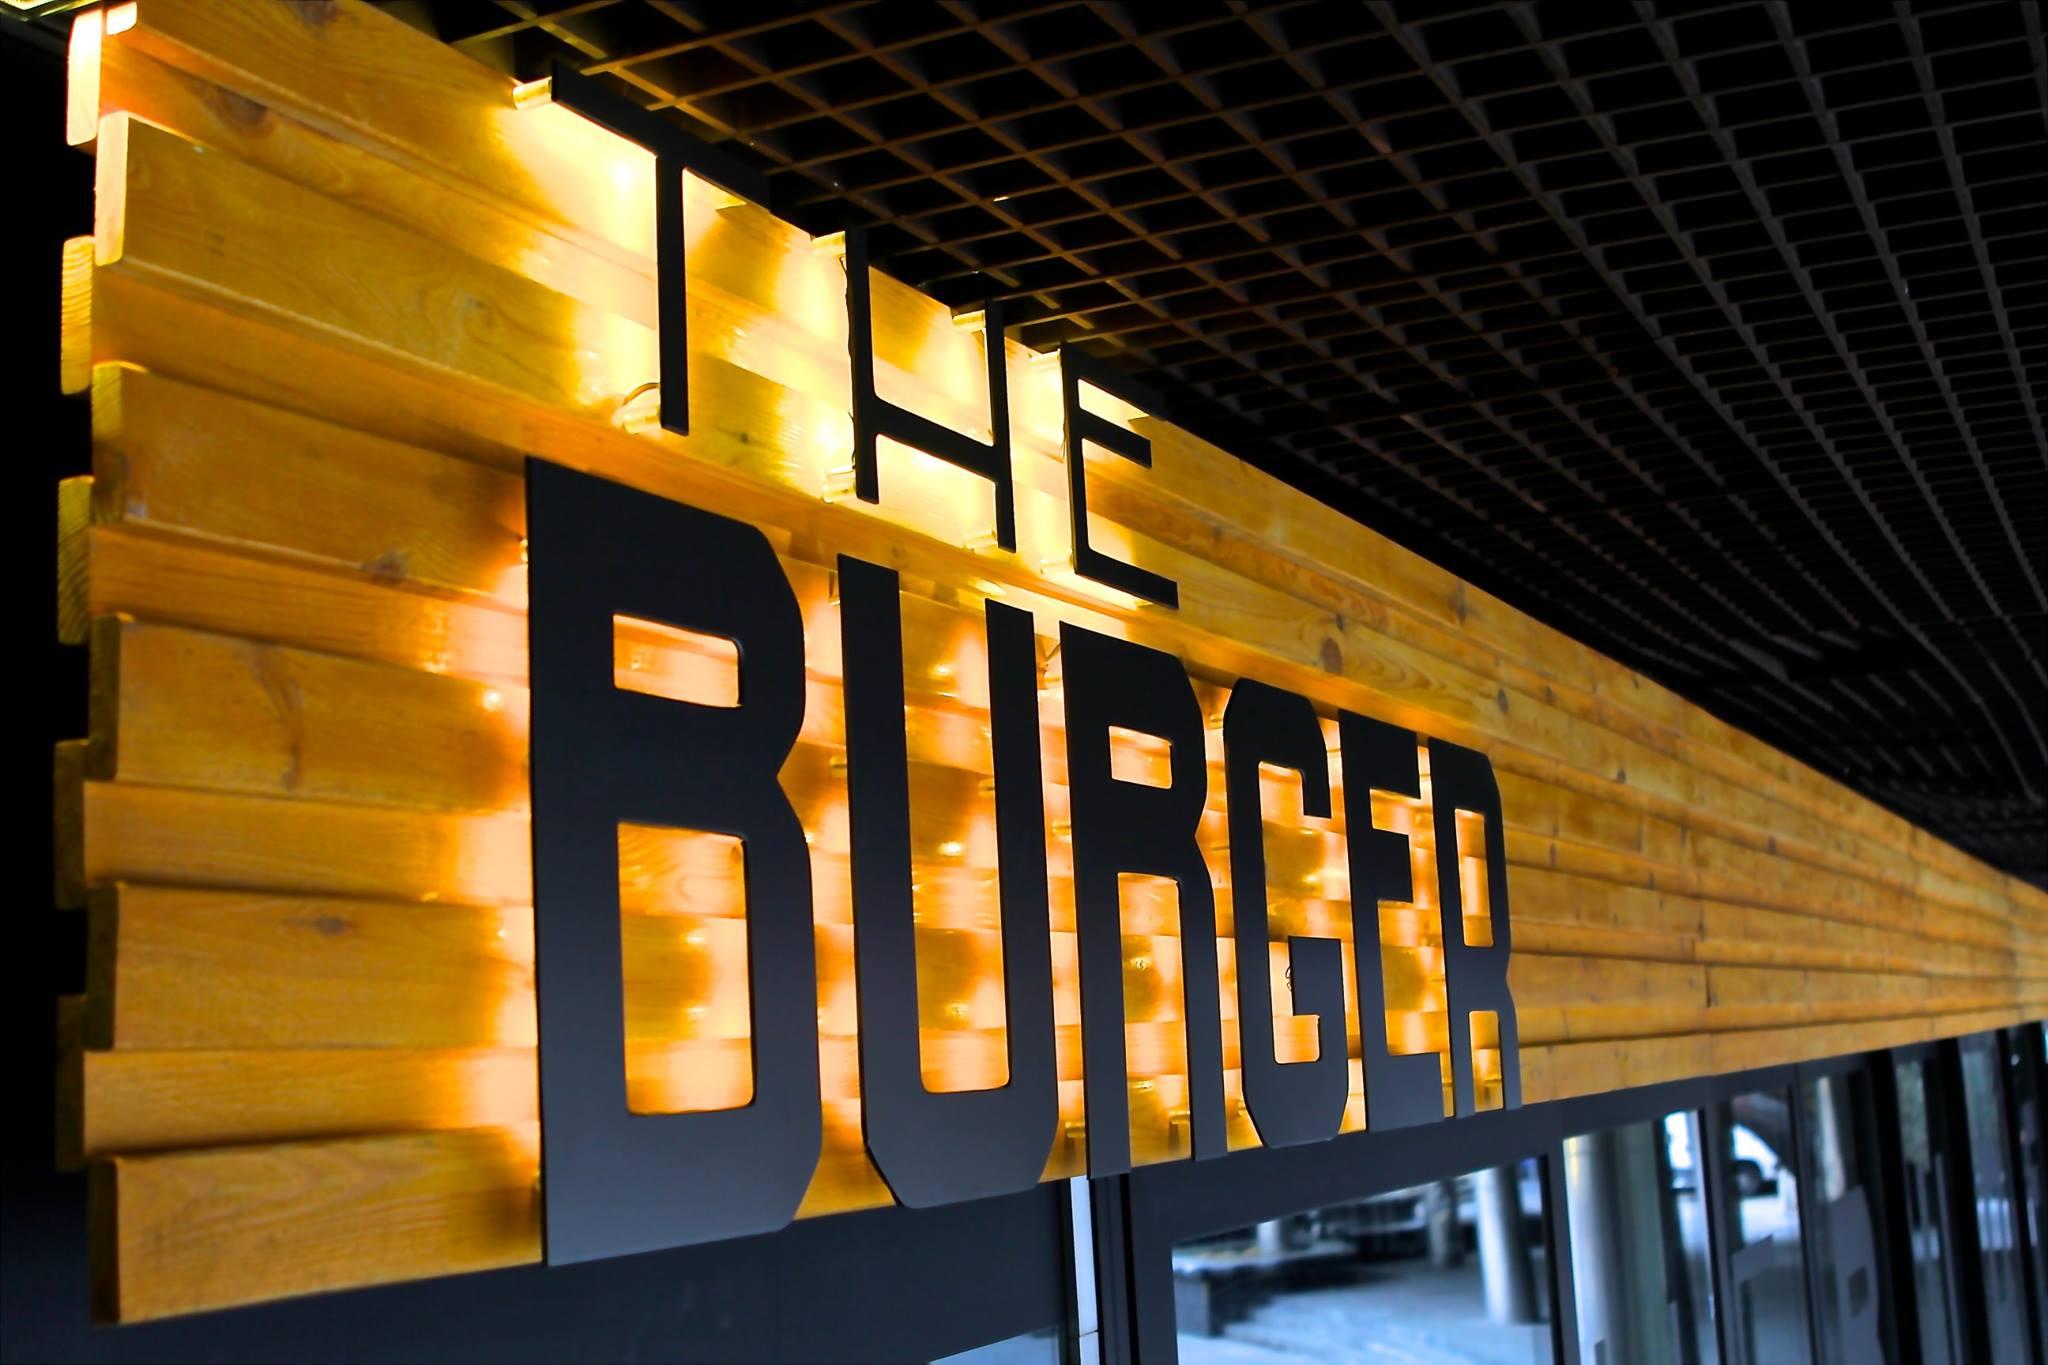 Cover image of this place The Burger